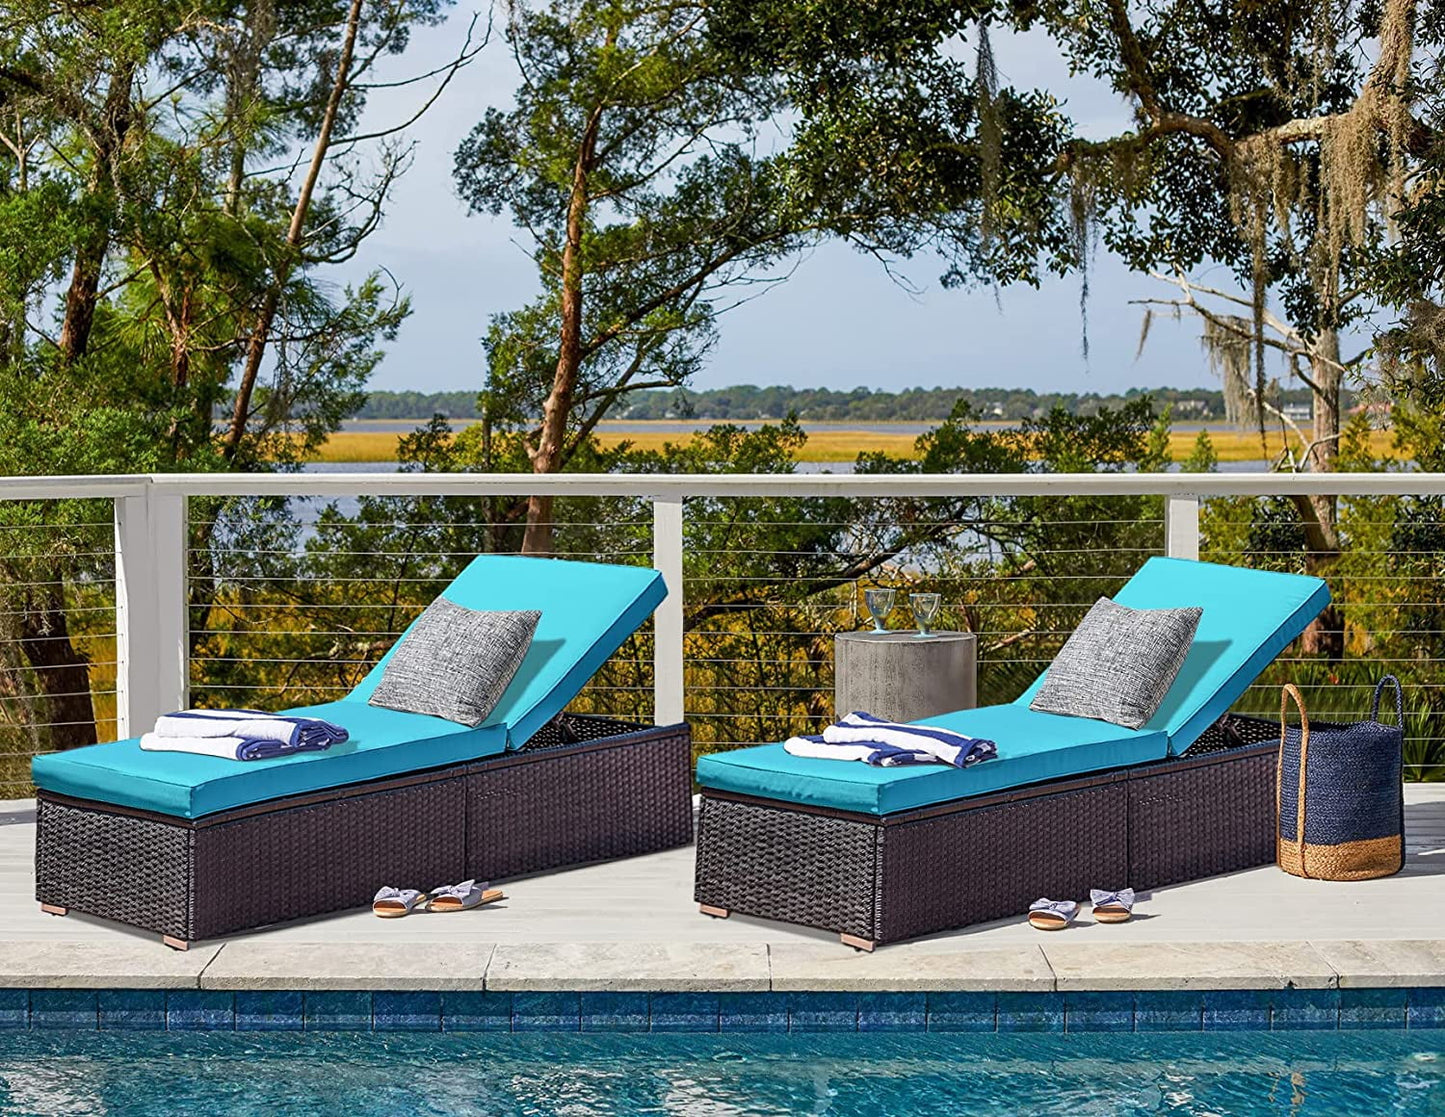 Sunvivi Outdoor Chaise Lounge, Patio Lounge Chair Wicker Adjustable Reclining Chair for Pool with Removable Cushion, Blue